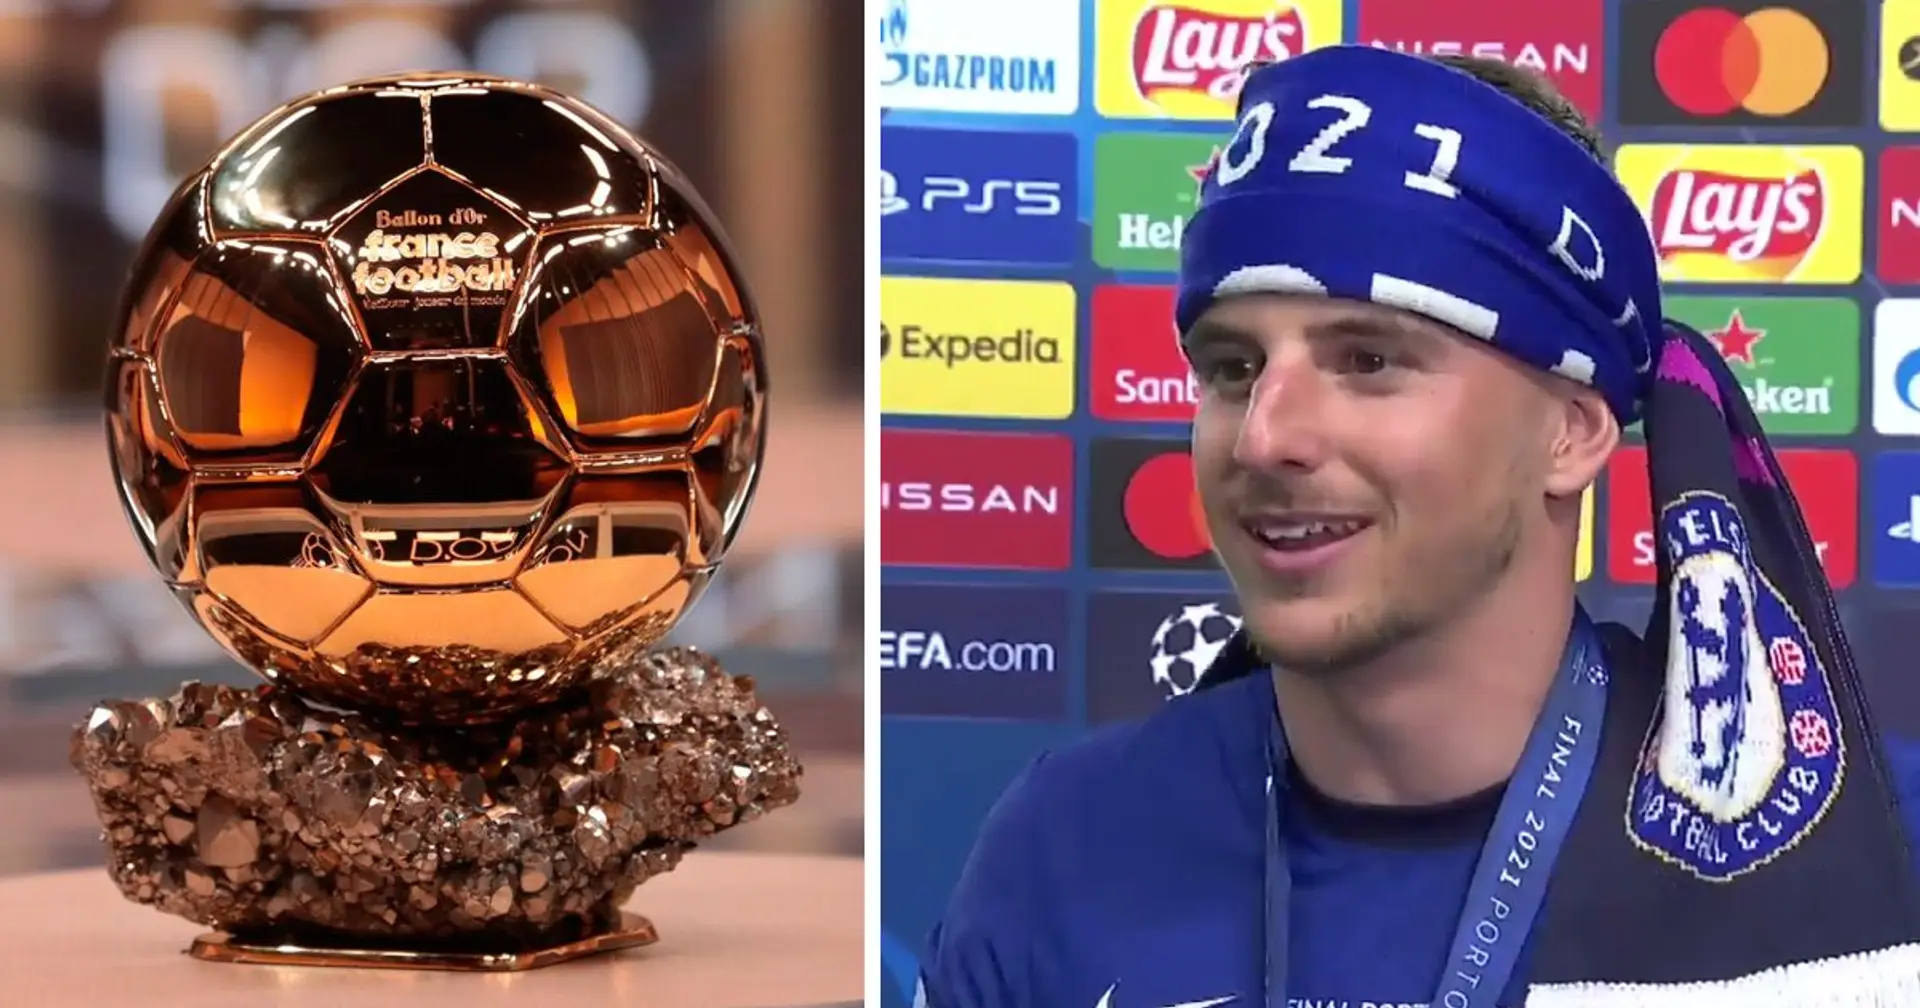 'It won't be big night of drinking, unfortunately': Mount's hilarious reply to question about winning Ballon d'Or